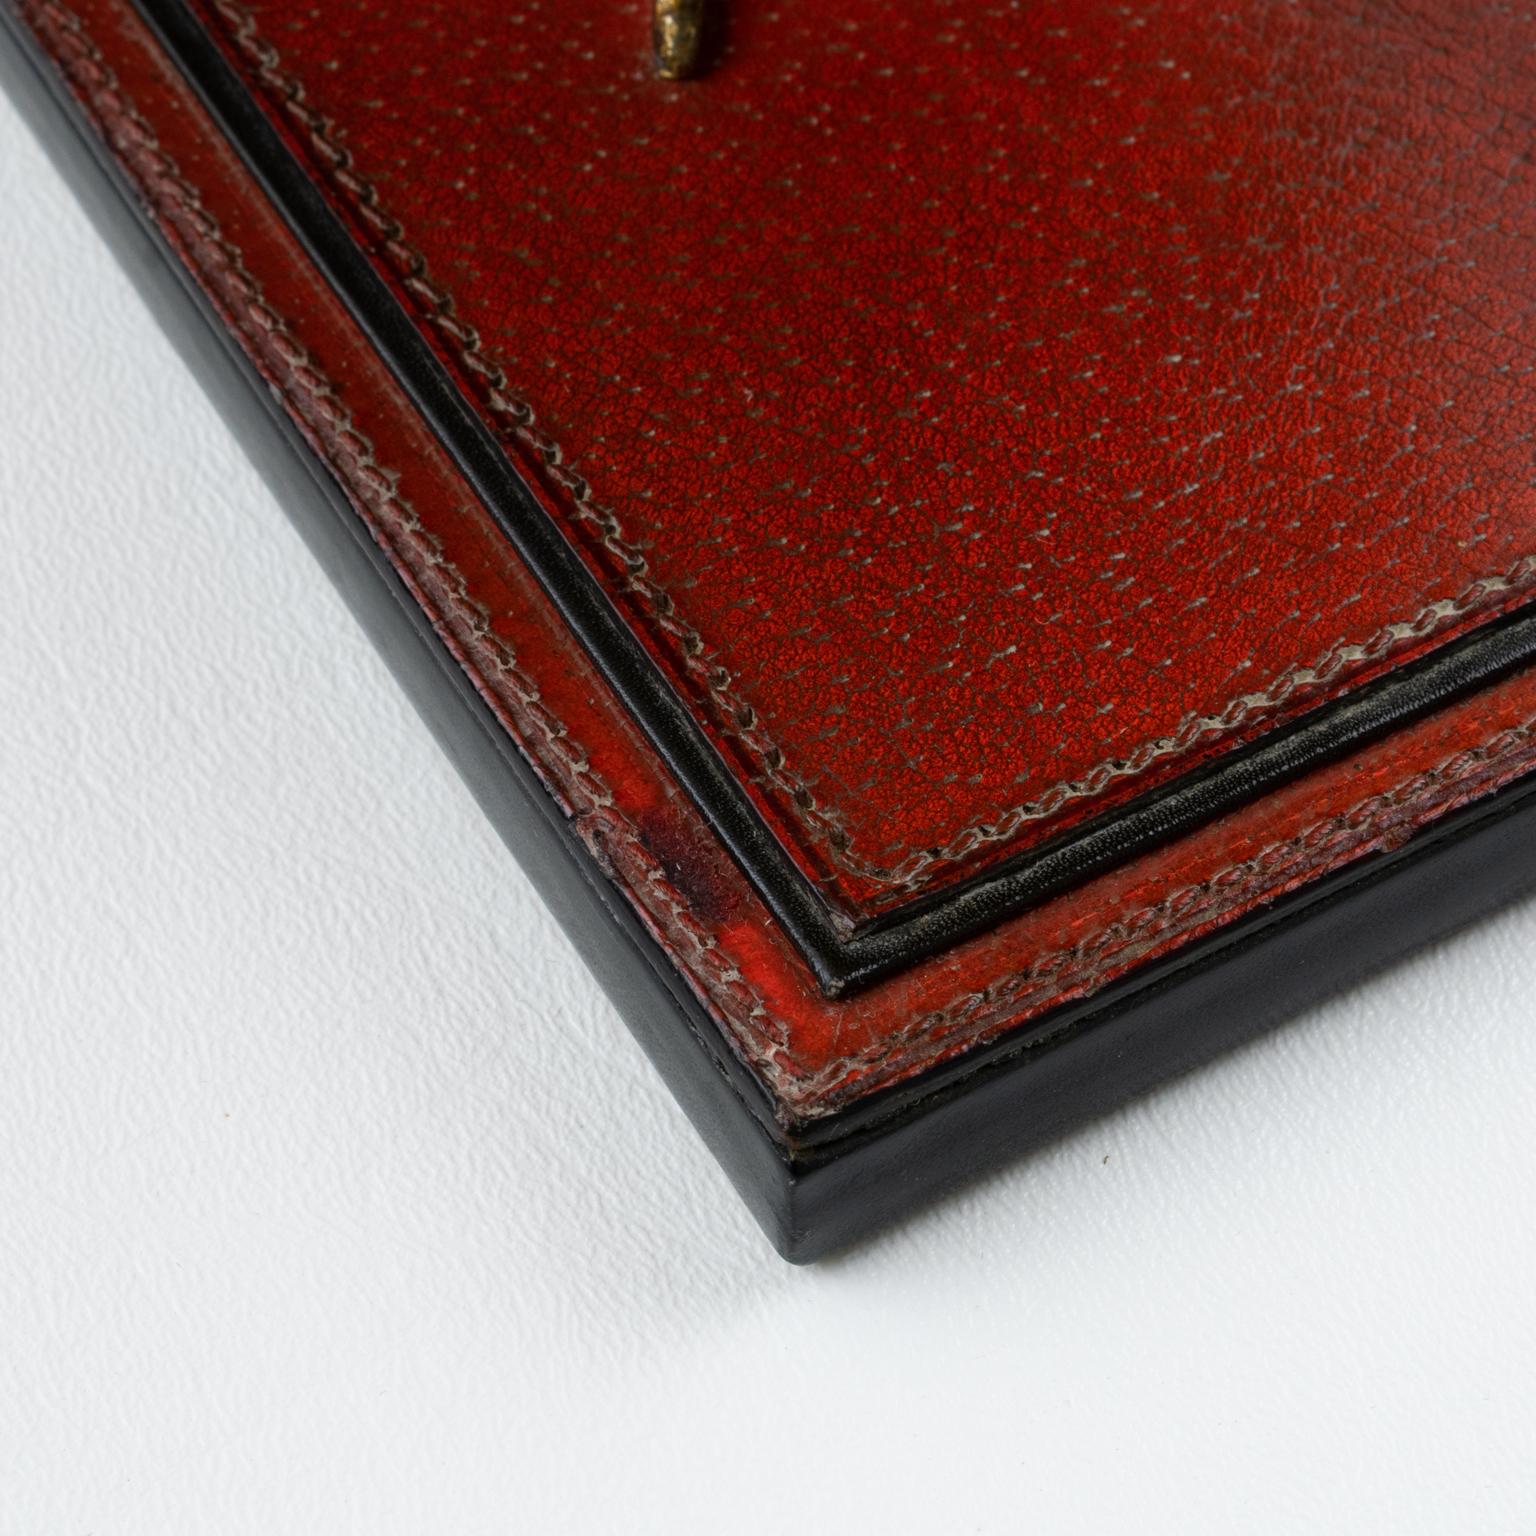 Gucci Italy Hand-Stitched Red Leather Bookends with Gilt Metal Partridges, 1970s 11